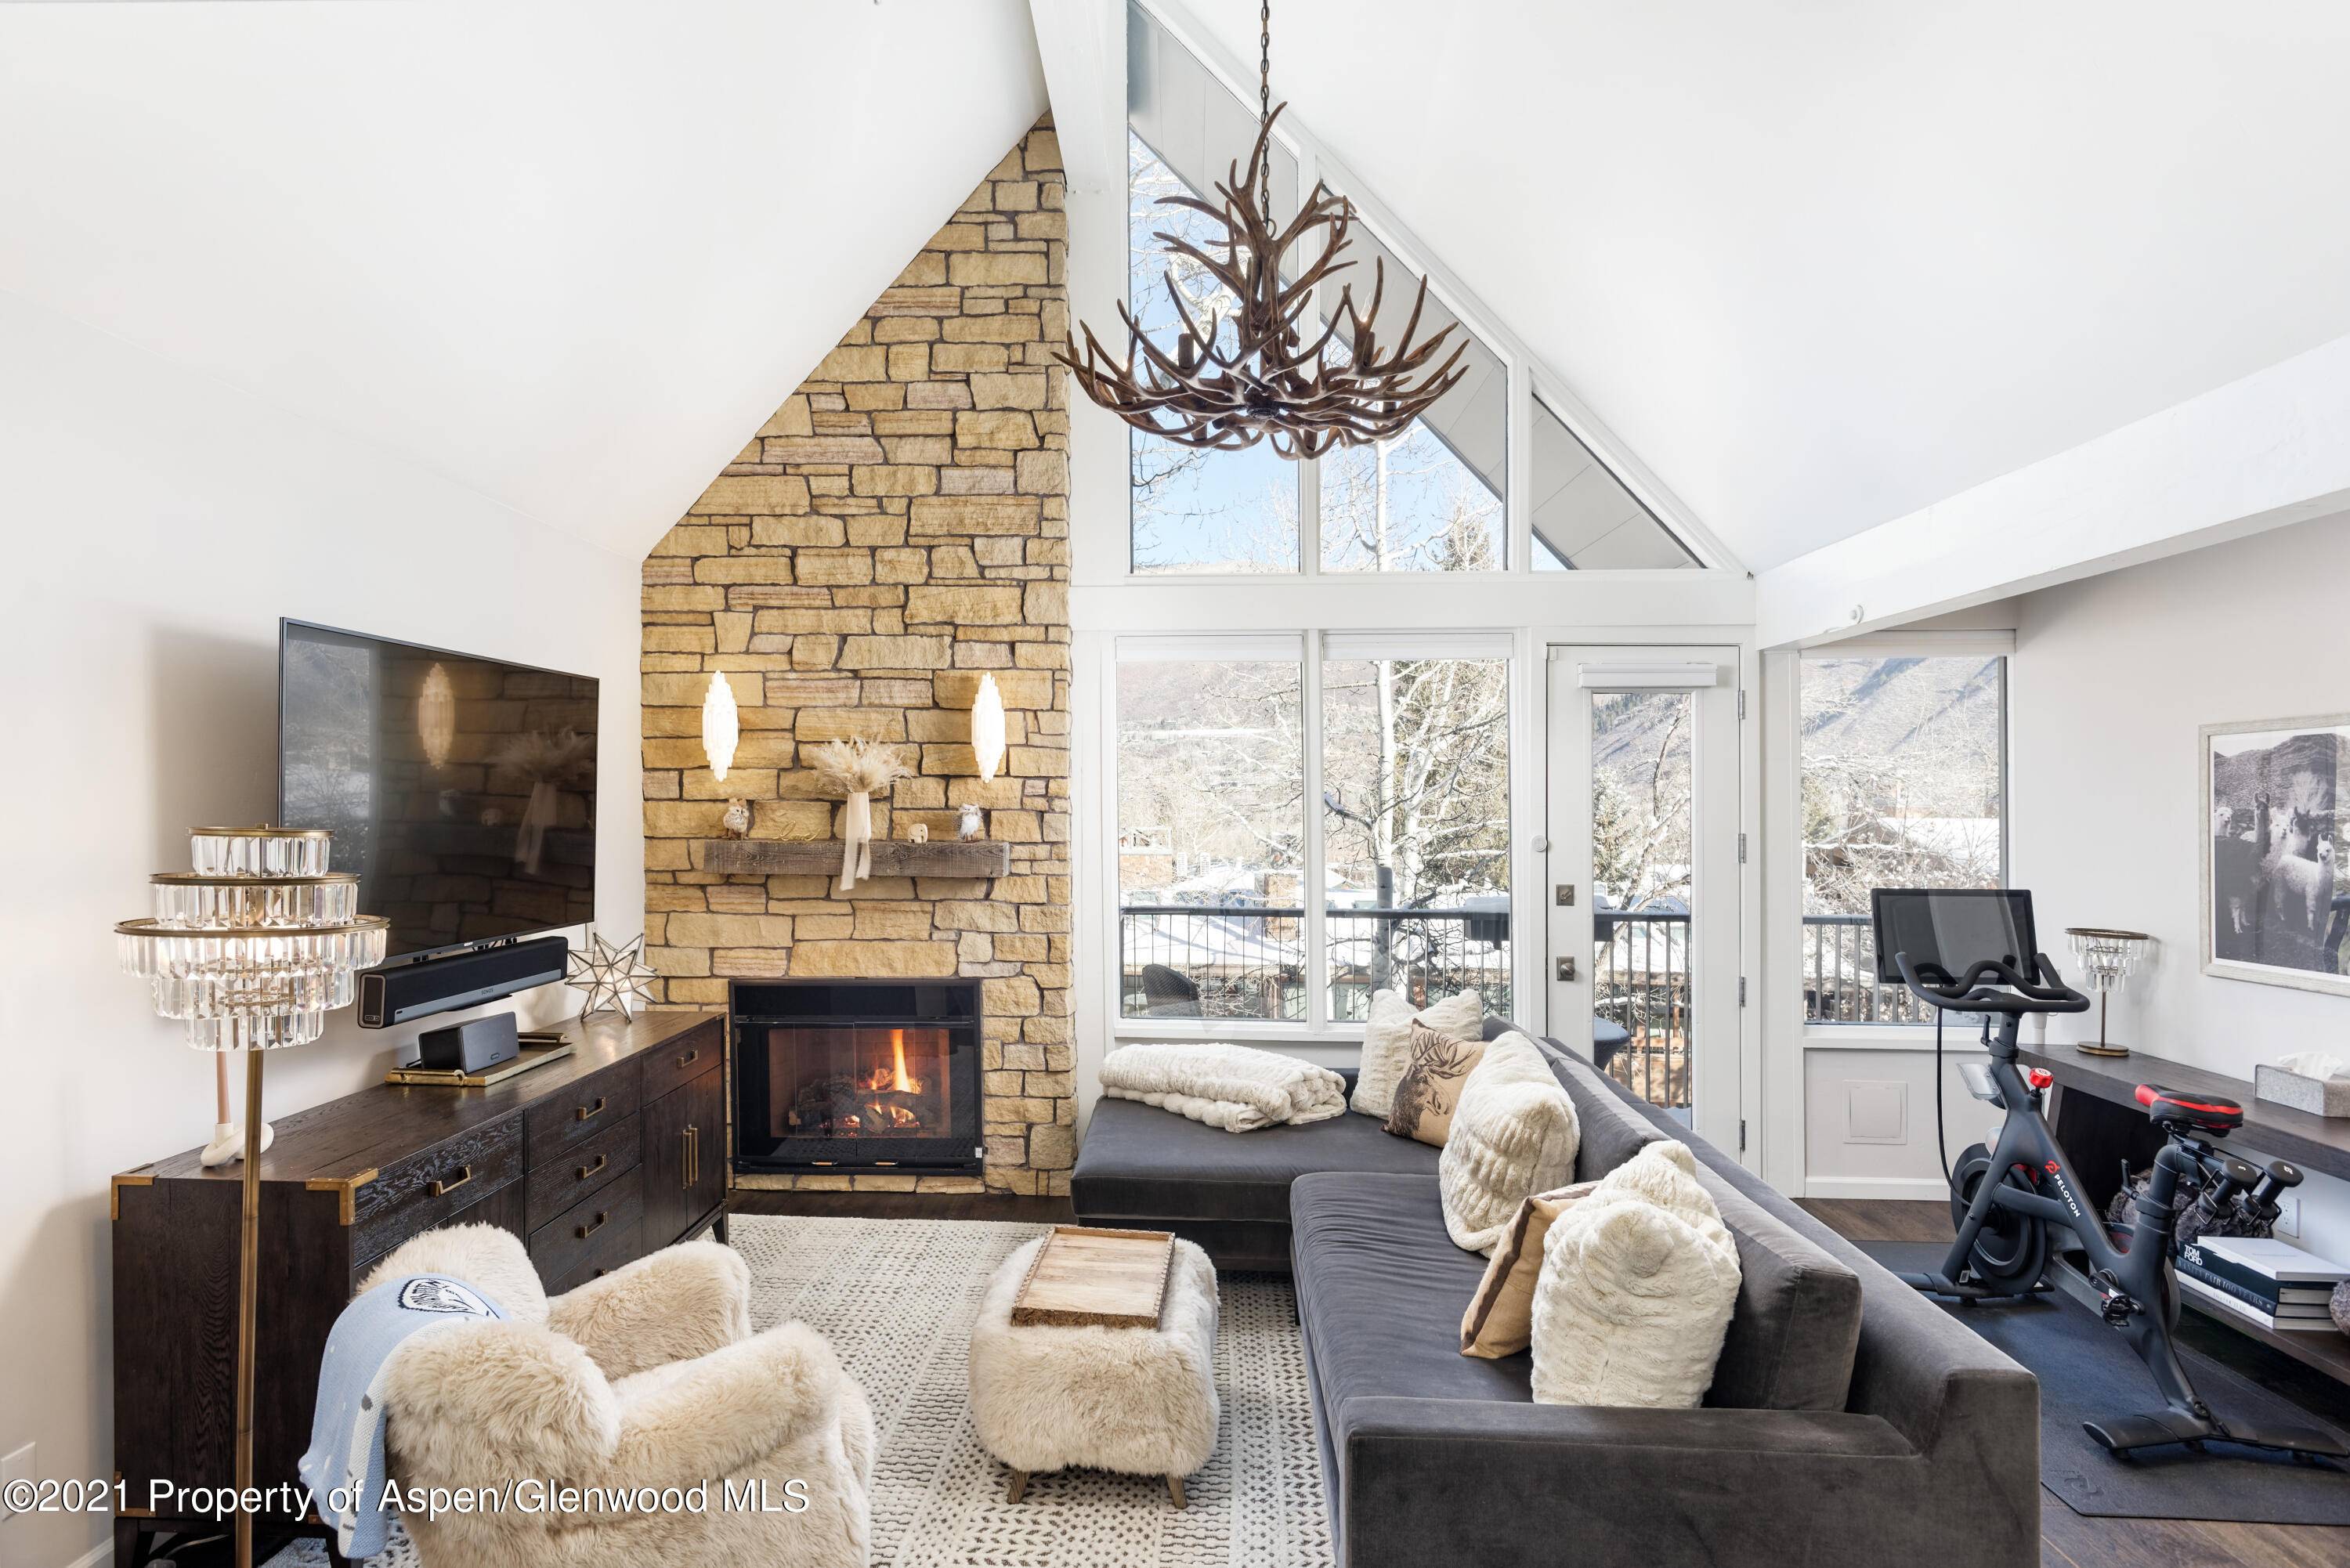 Sitting right in the heart of Aspen, is this gorgeous, recently updated and Restoration Hardware decorated top floor, corner unit.